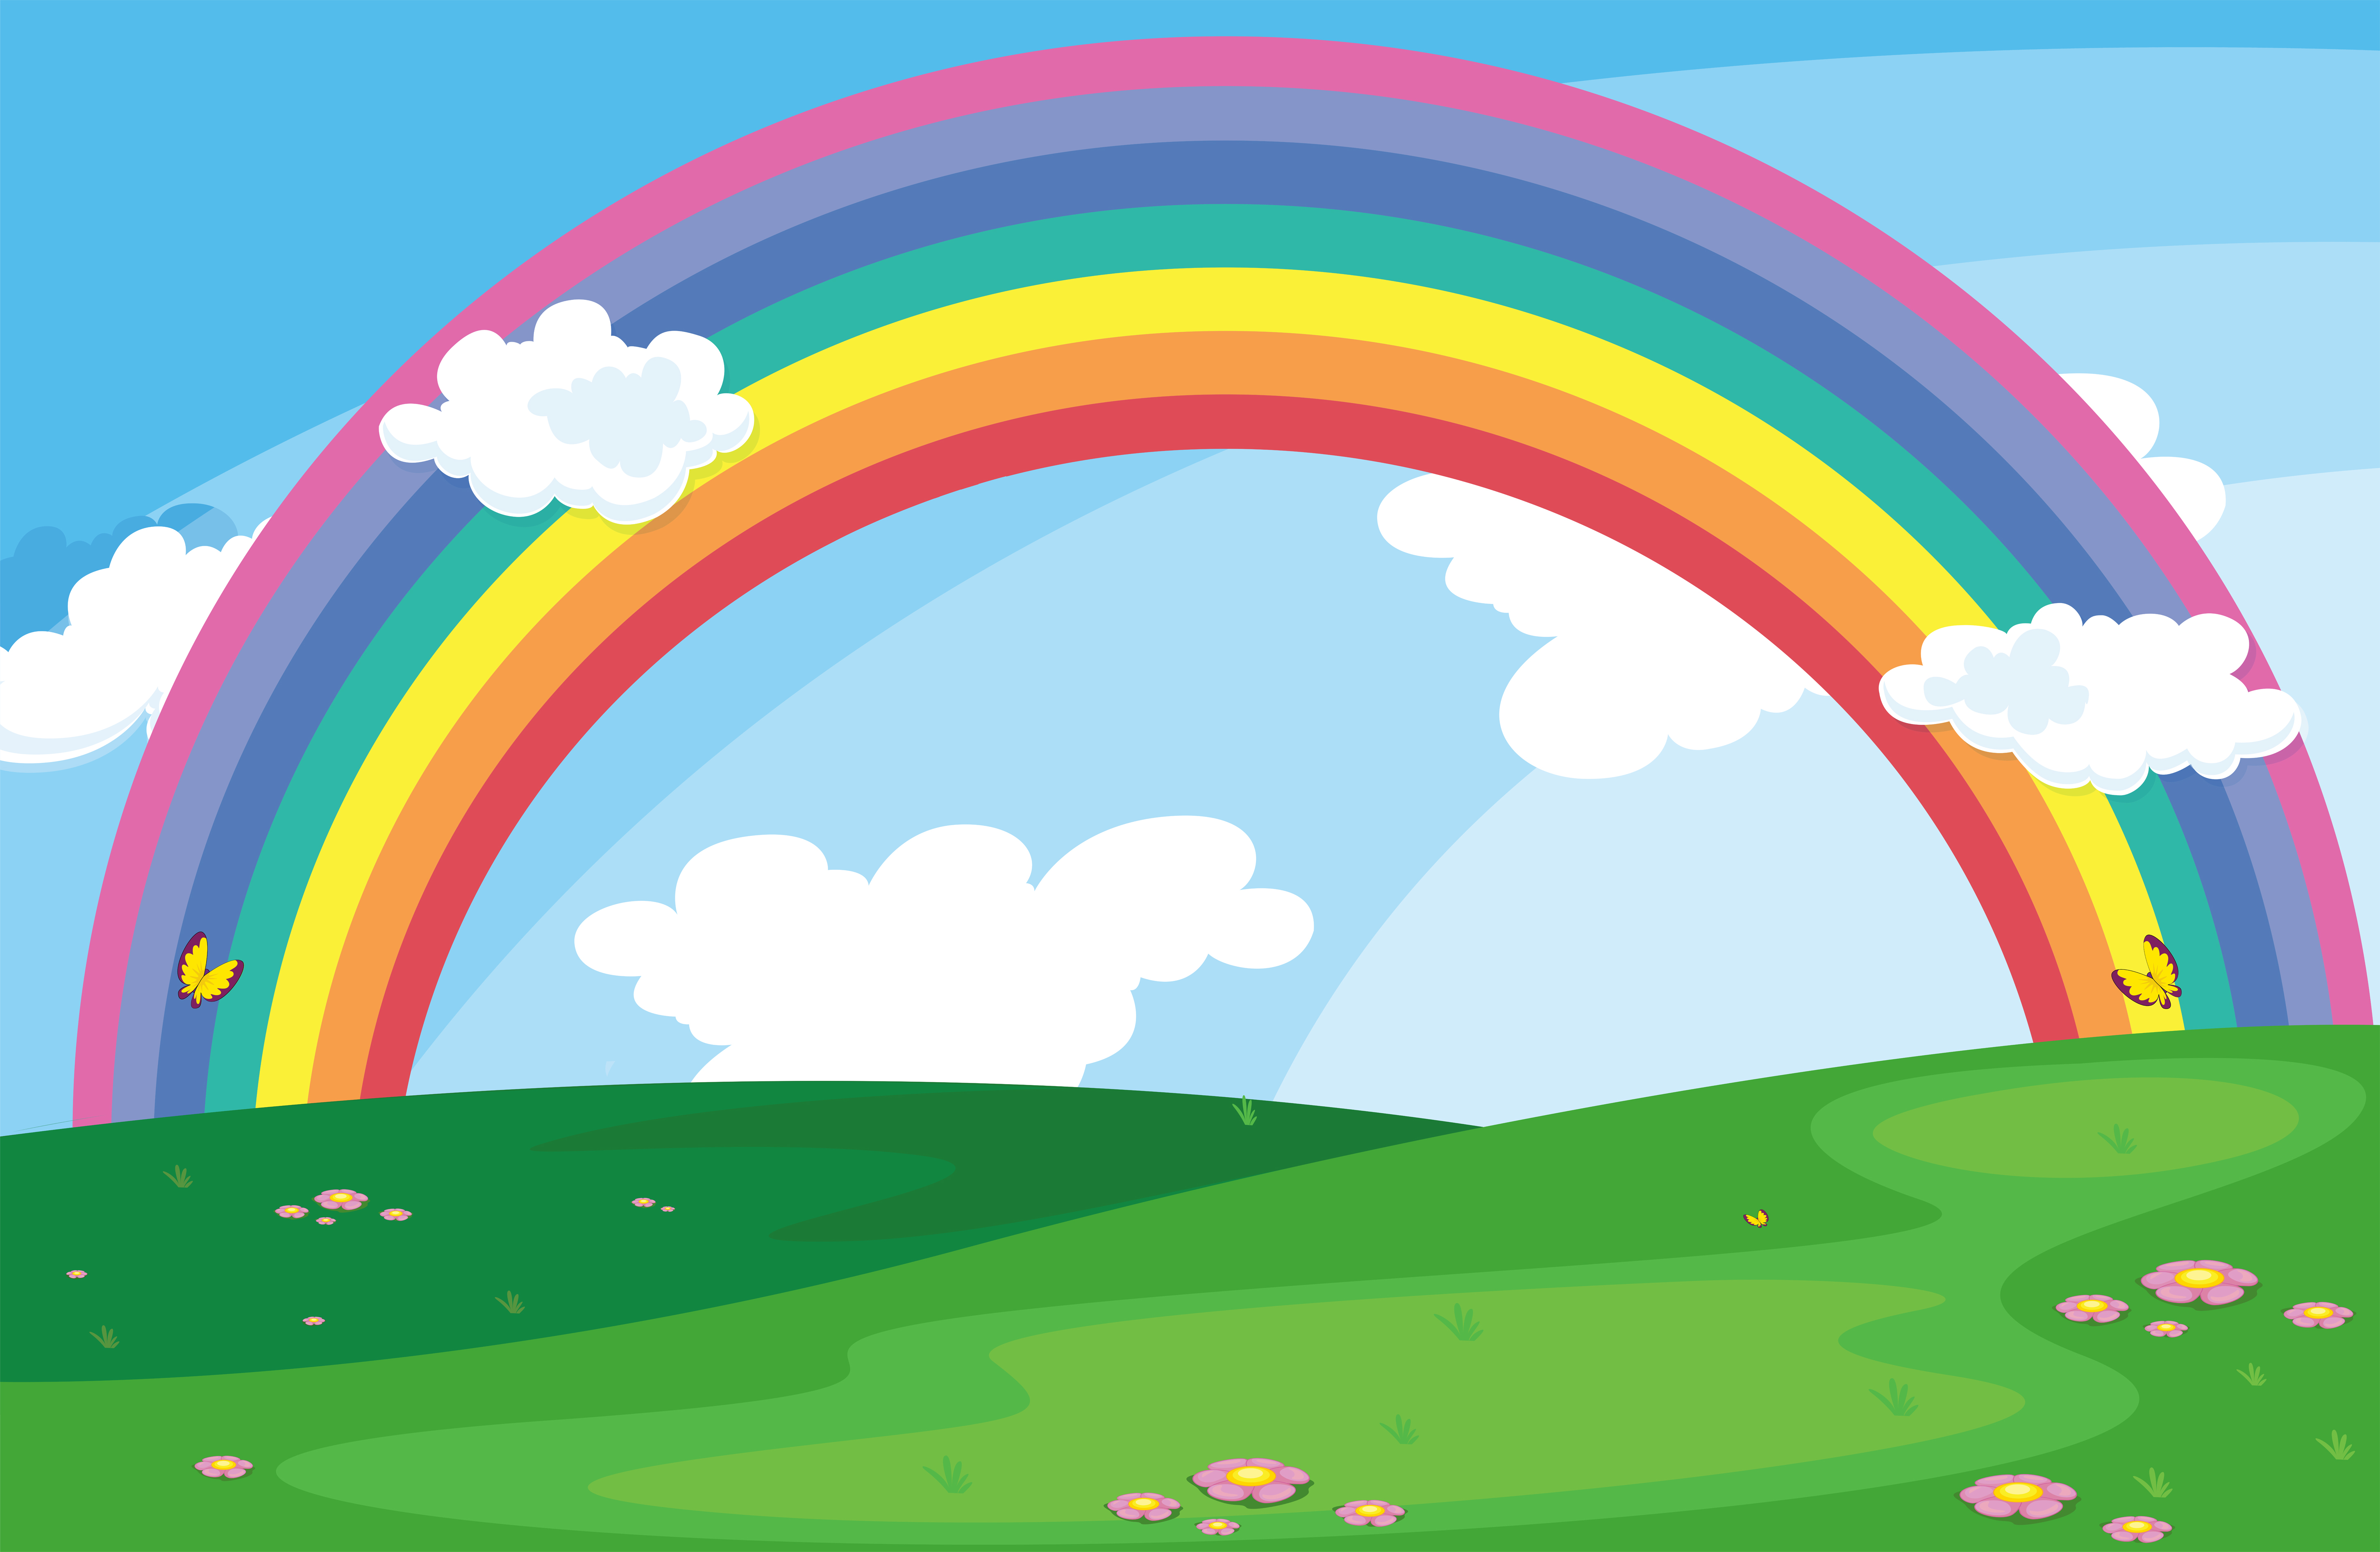 Rainbow Landscape Vector Art Icons And Graphics For Free Download